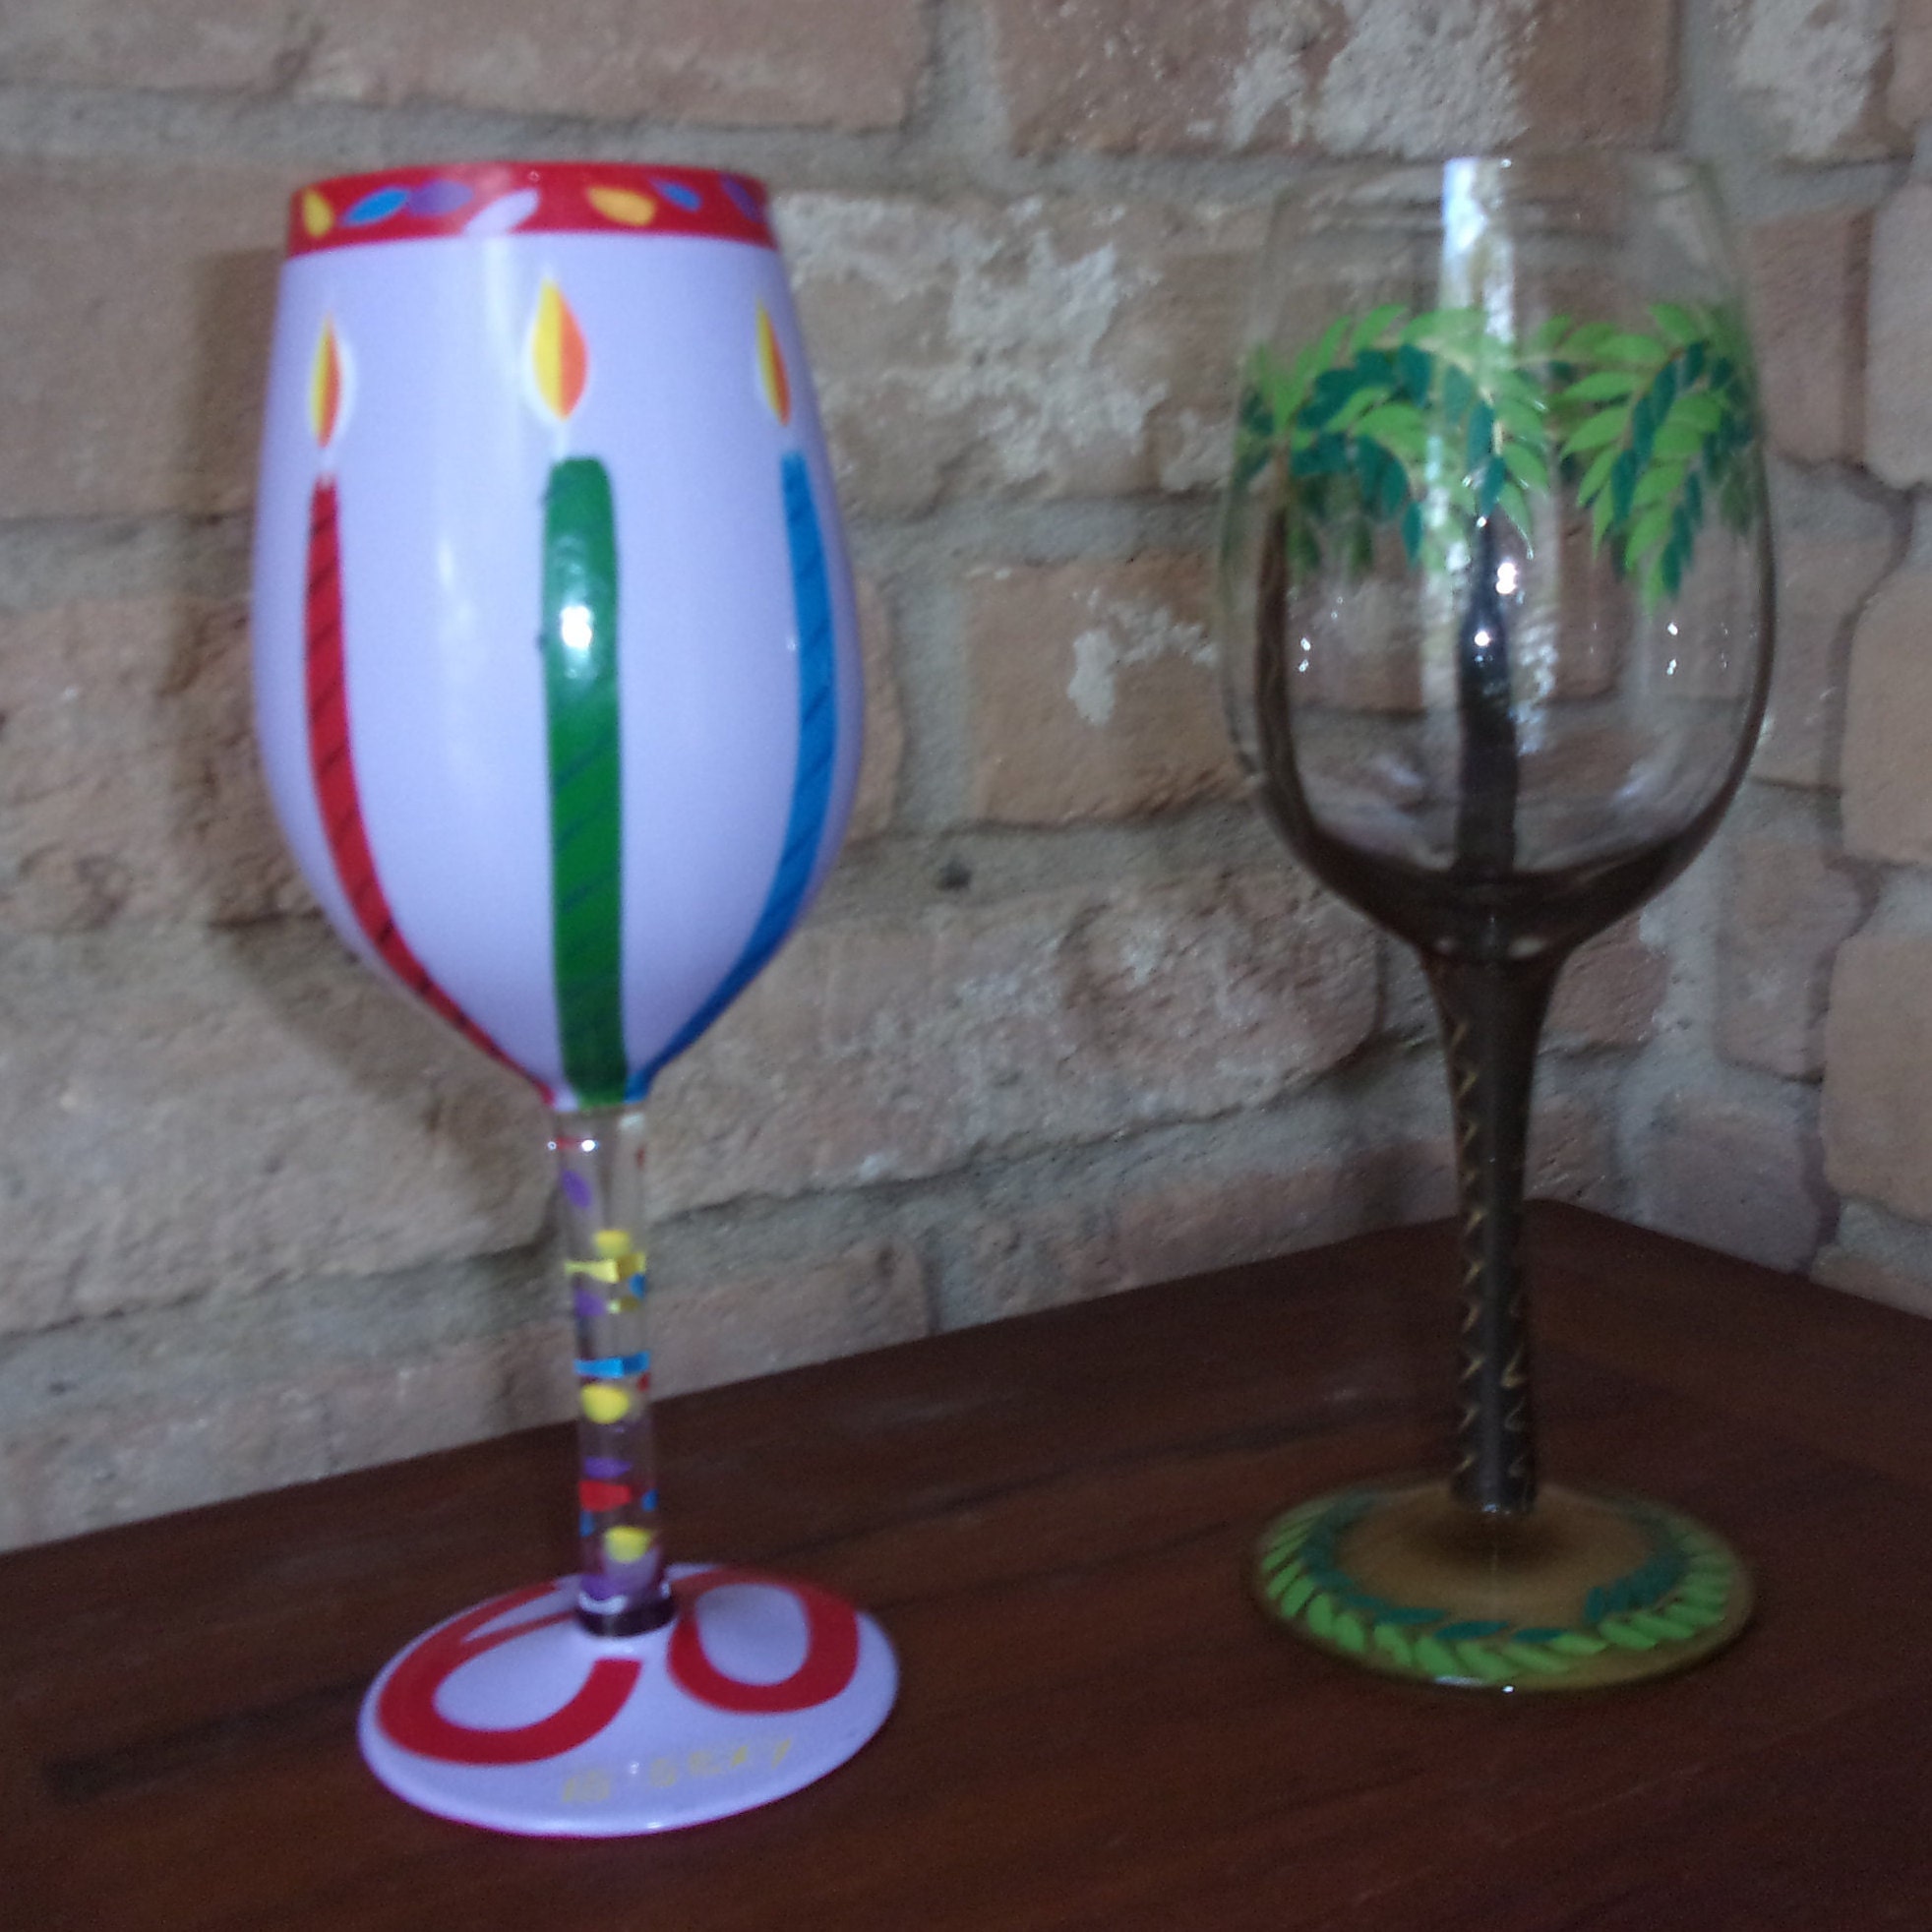 Designs by Lolita “Pretty as a Peacock” Hand-painted Artisan Wine Glass, 15  oz.